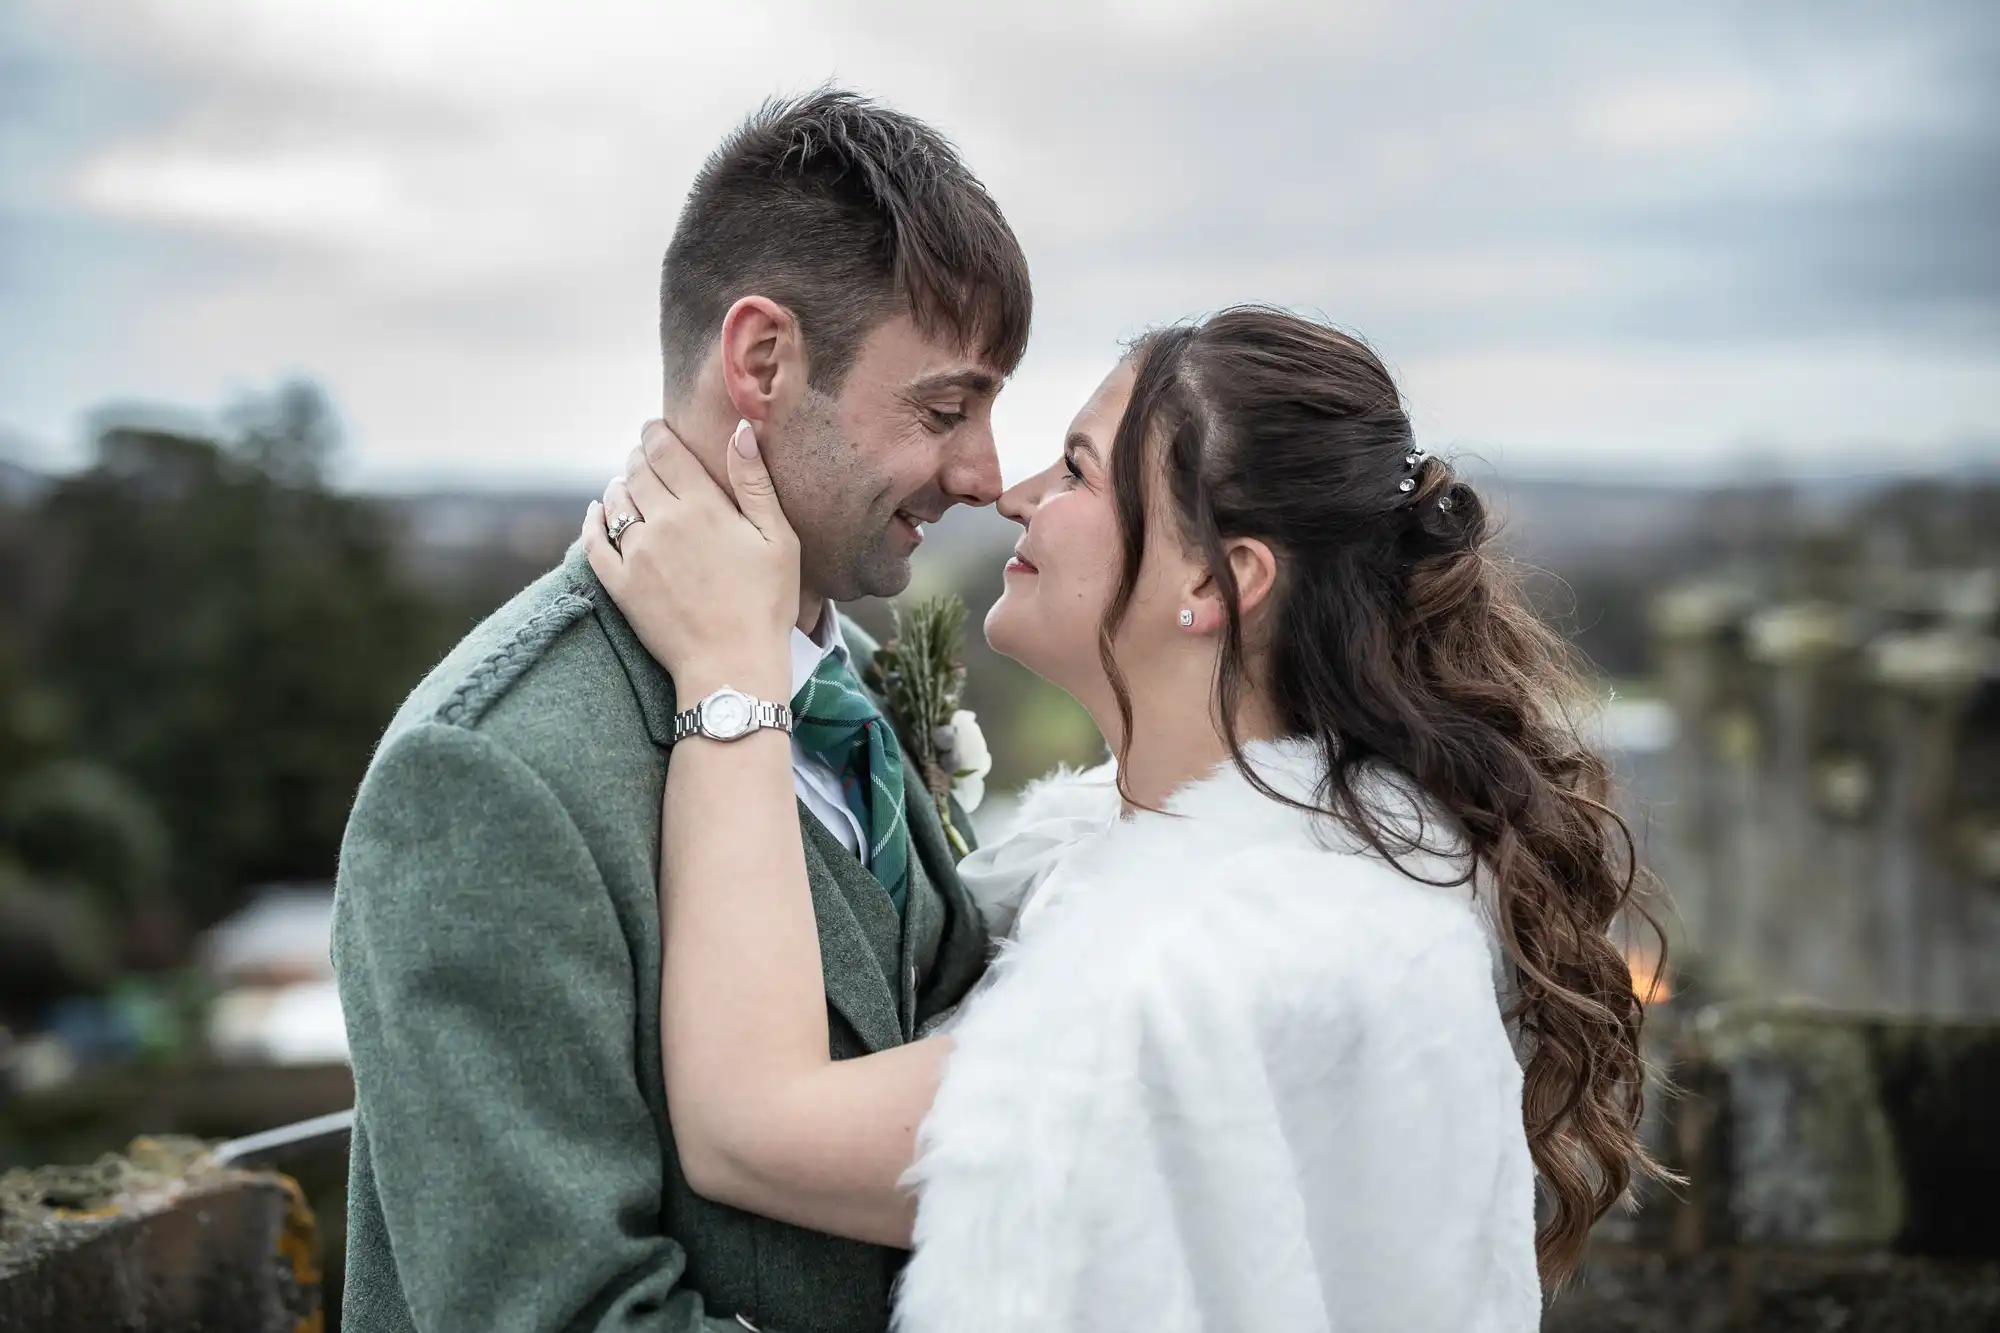 Wedding photographer at Dundas Castle for Zoe and Billy’s magnificent Hogmanay wedding